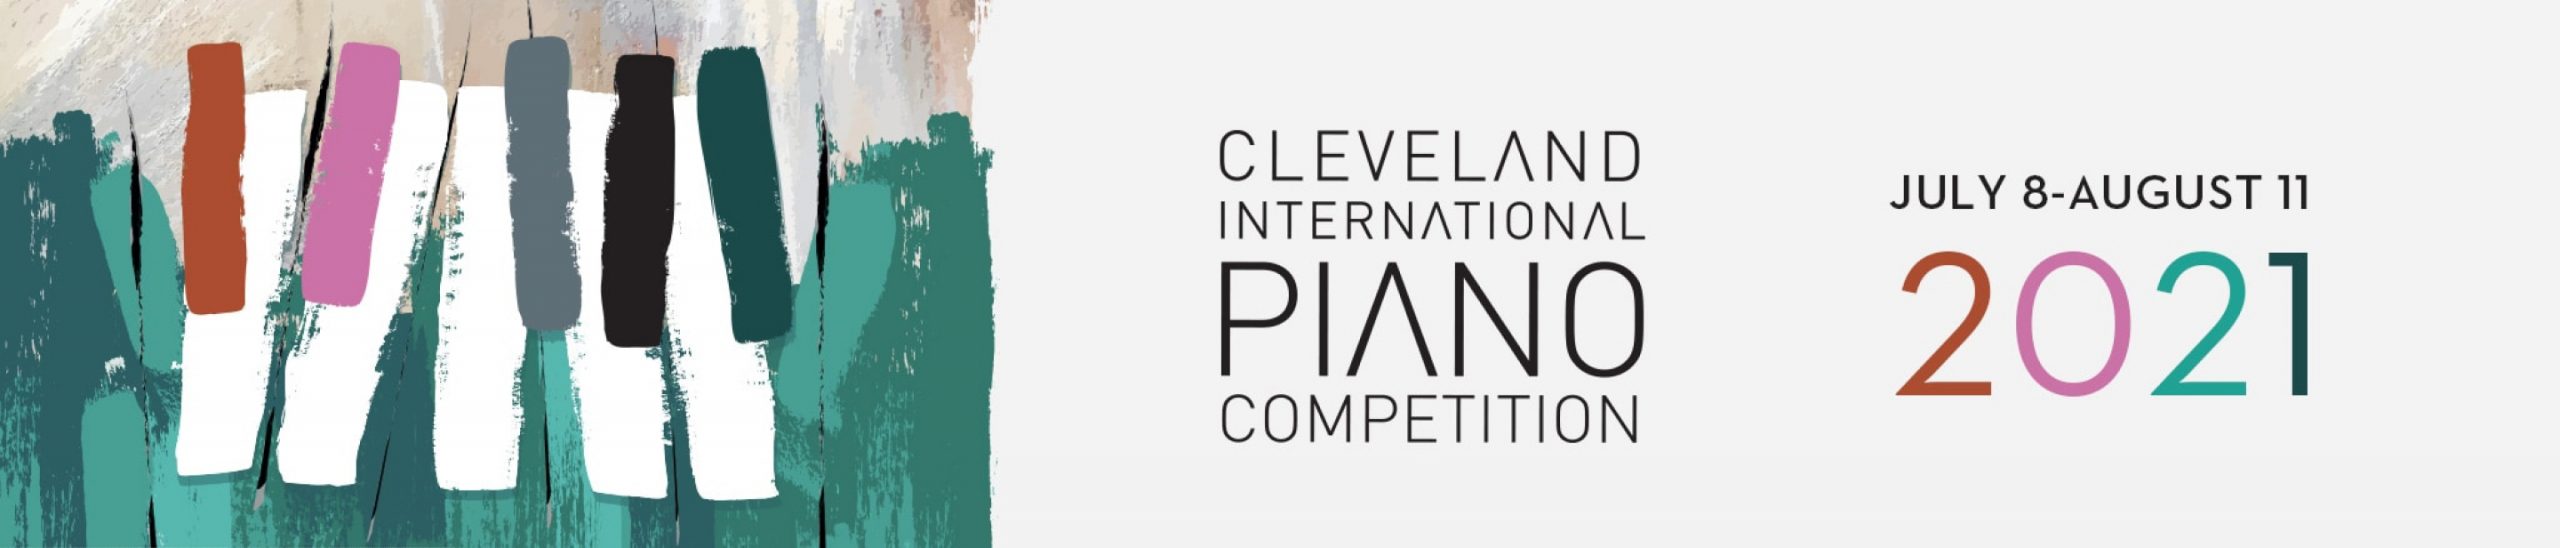 Cleveland Piano July 8th-August 11 2021 banner